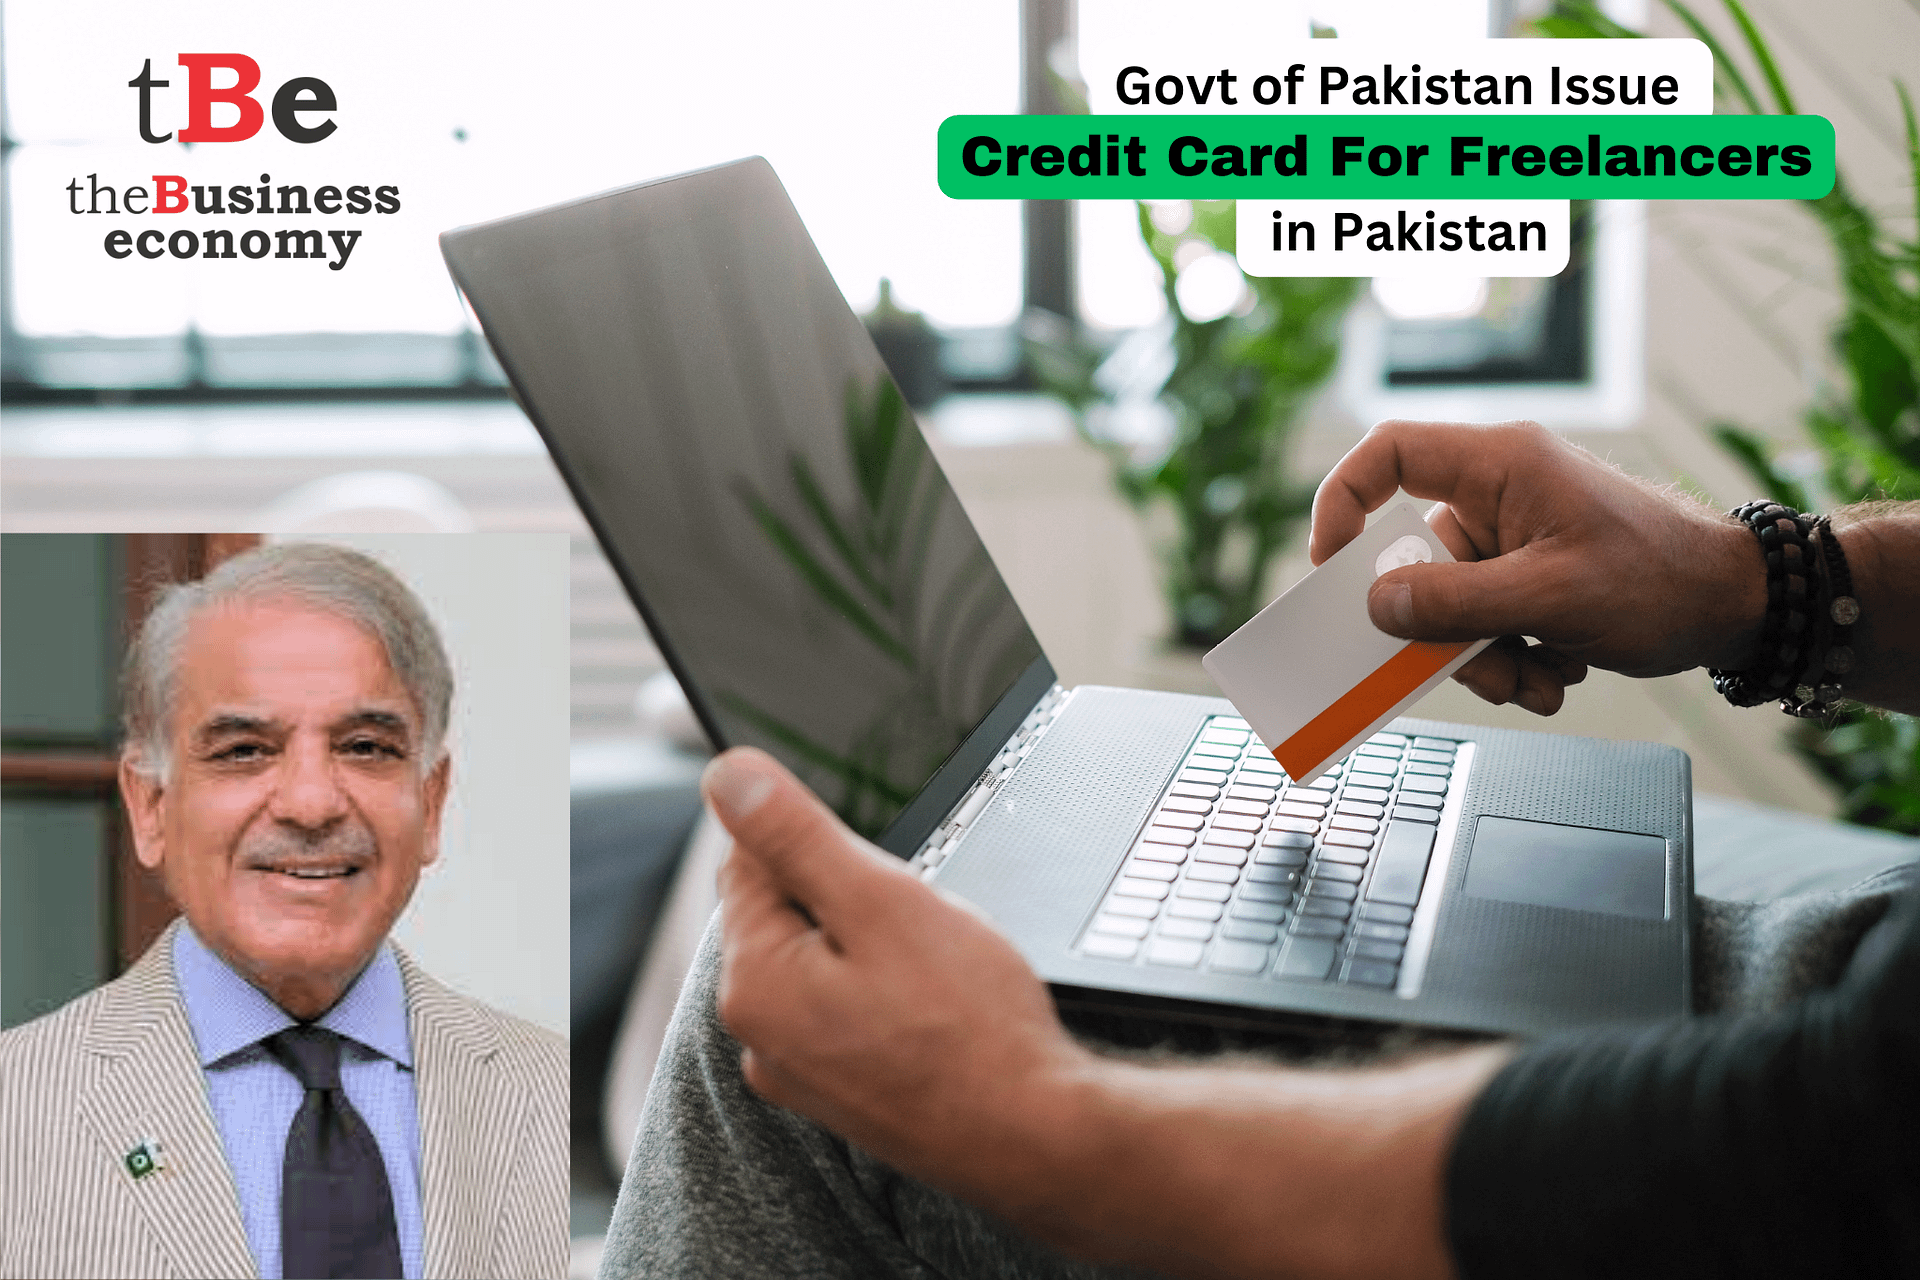 A Freelancer Credit card with a monthly limit of up to $5000 has been launched by Govt of Pakistan